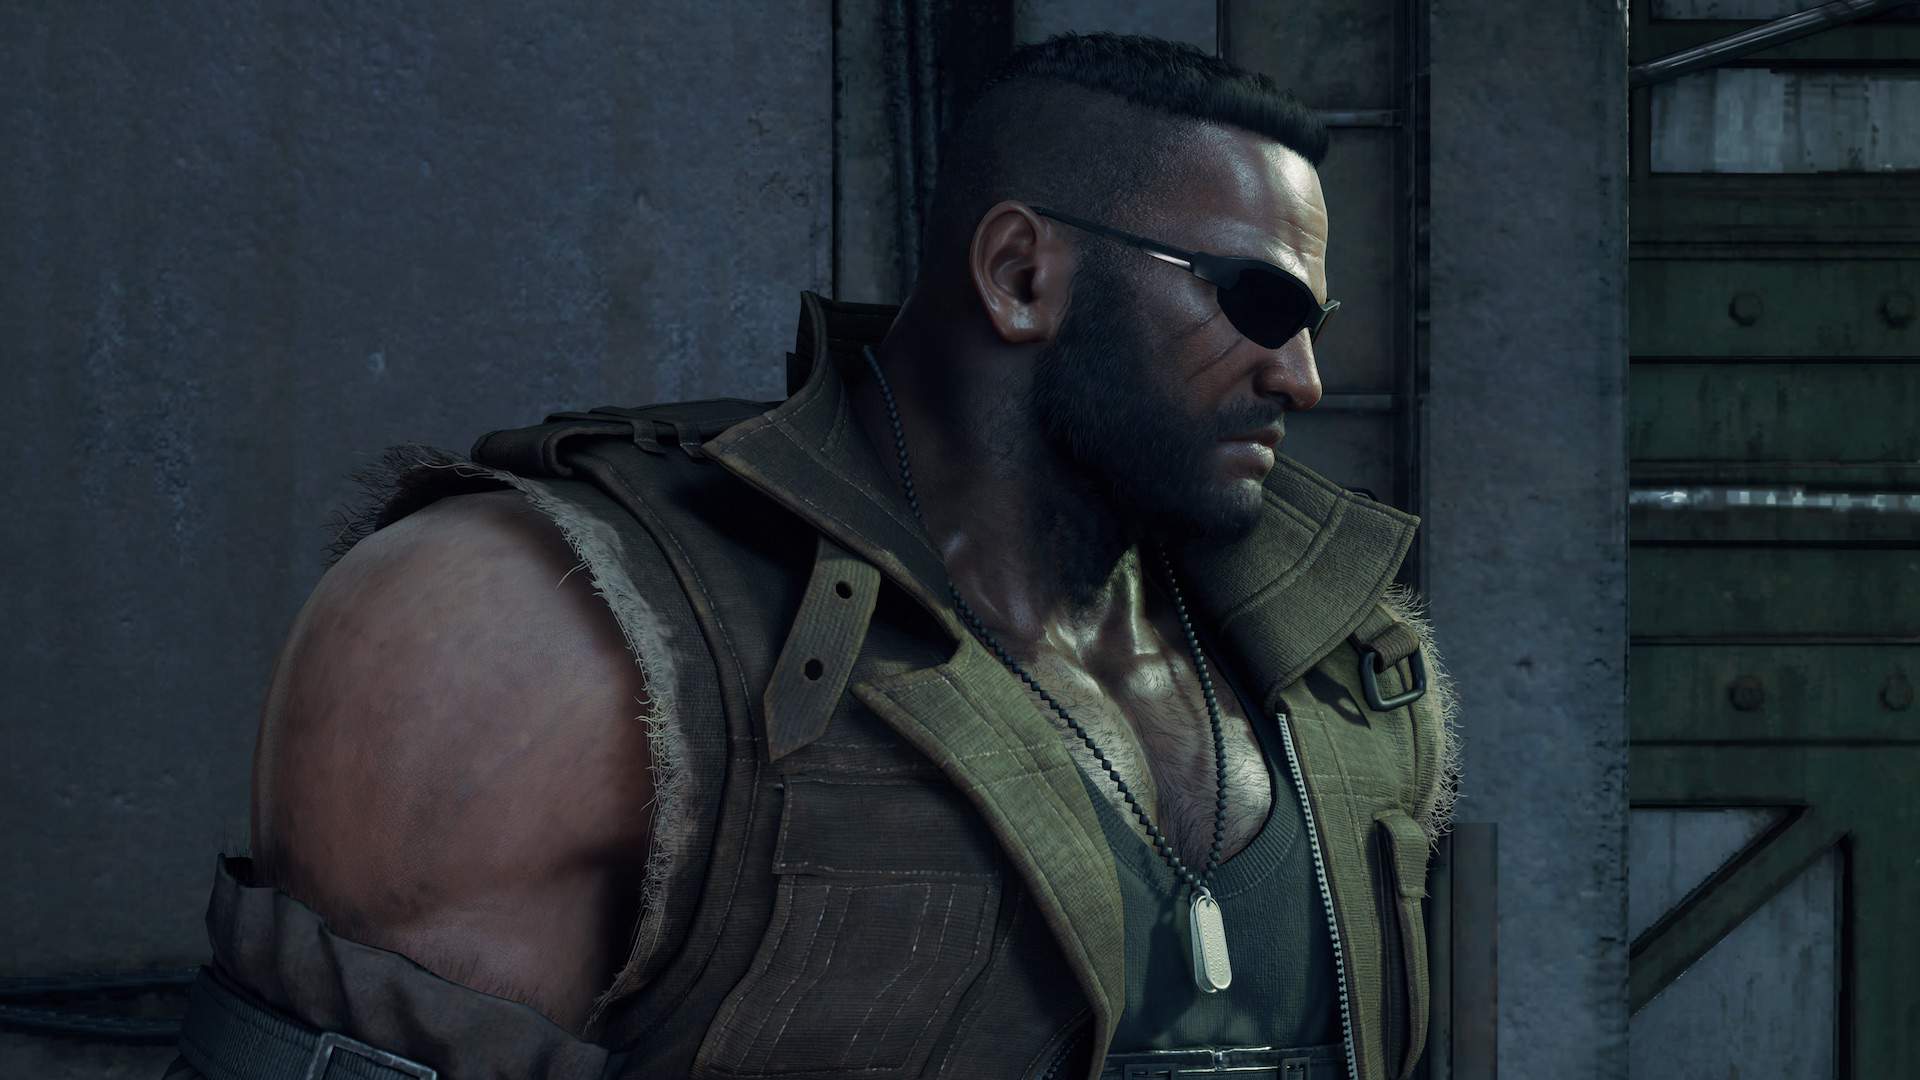 A side shot of Barret Wallace from FINAL FANTASY VII REMAKE. He is looking directly ahead with a serious expression on his face.